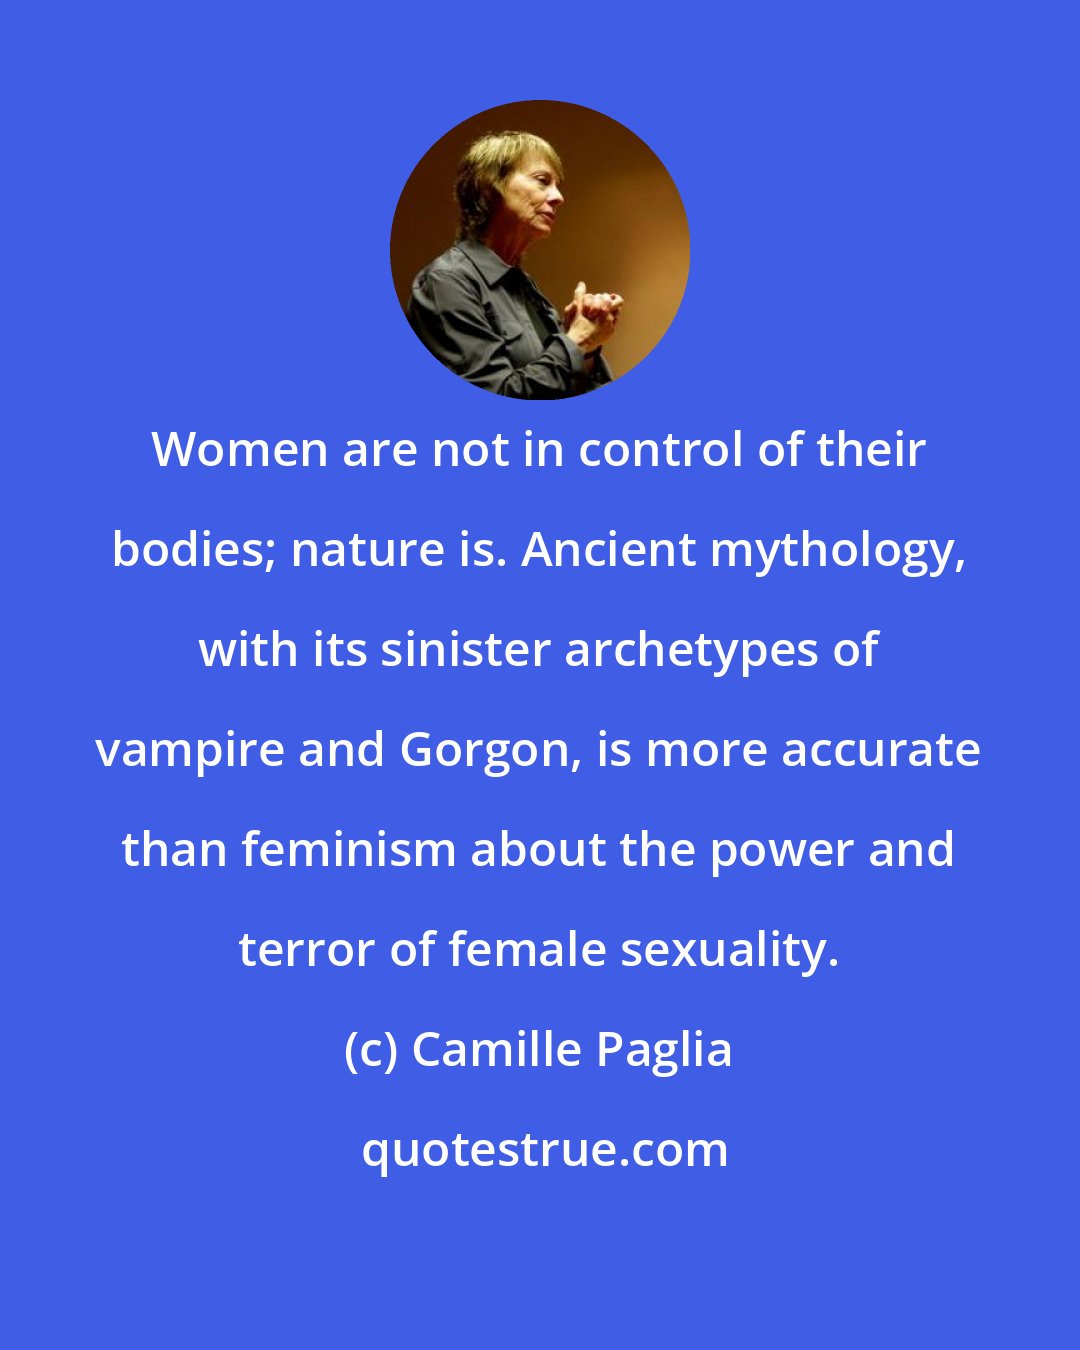 Camille Paglia: Women are not in control of their bodies; nature is. Ancient mythology, with its sinister archetypes of vampire and Gorgon, is more accurate than feminism about the power and terror of female sexuality.